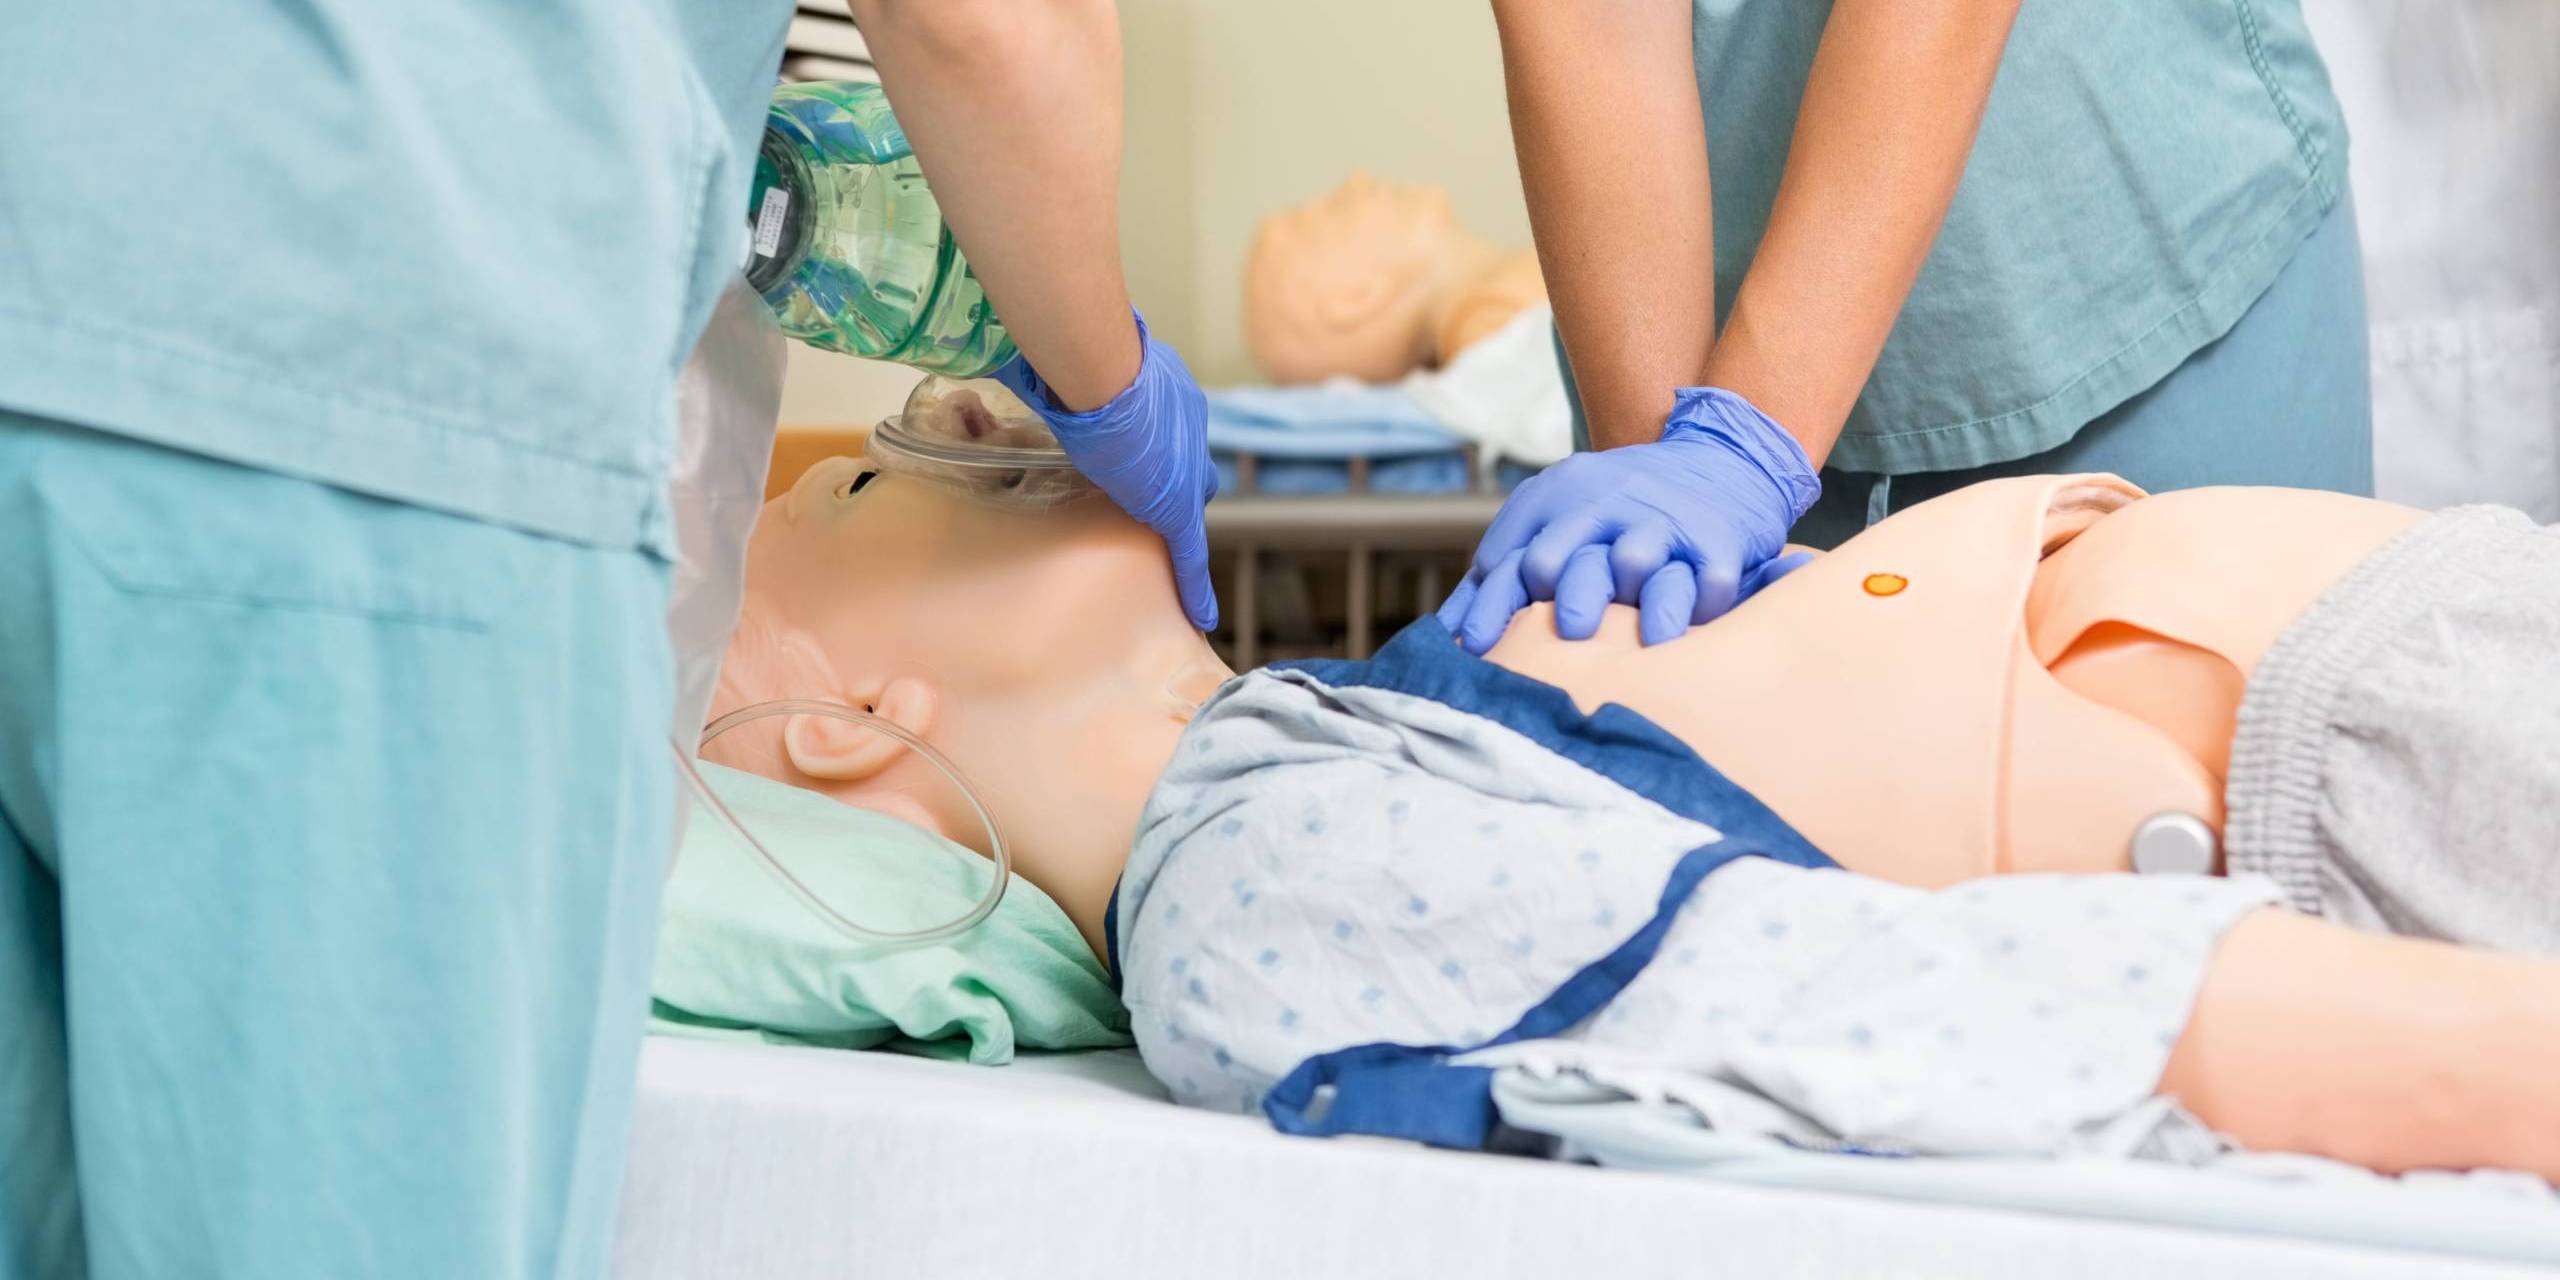 Birthing simulator helps nursing students get labor and delivery experience  During COVID